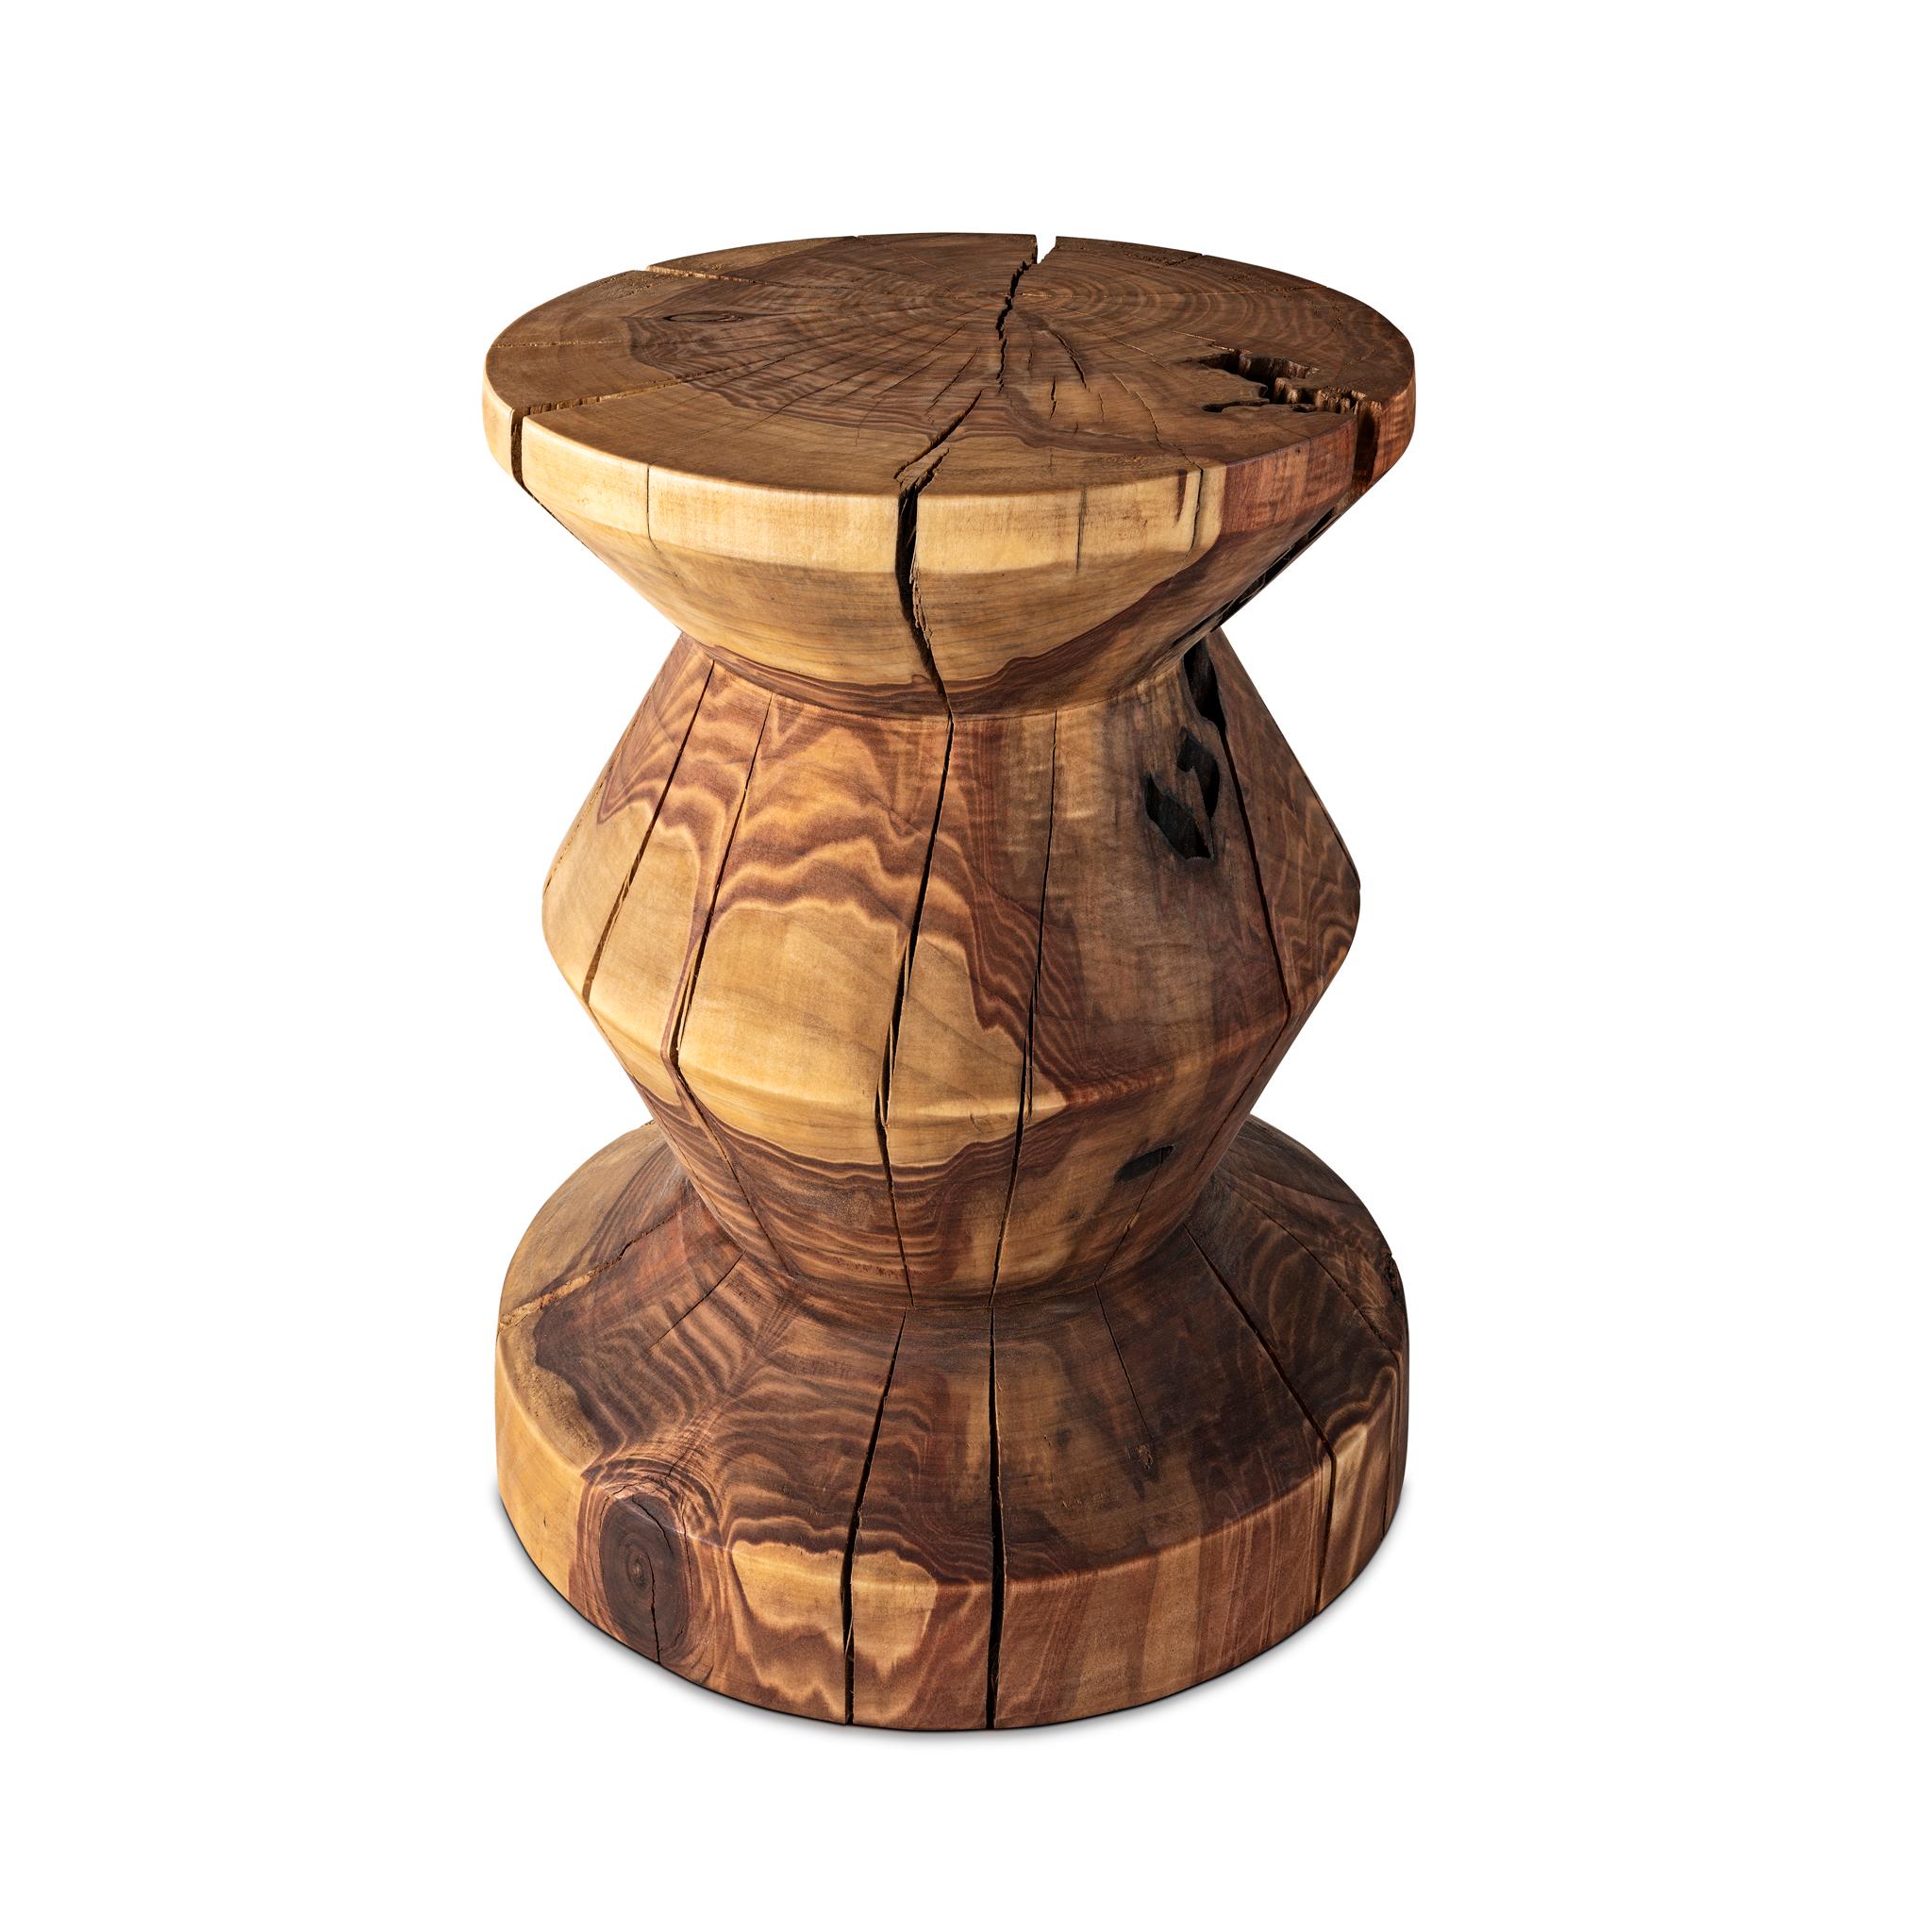 N.1 side table by Timbart
Dimensions: D 38 x H 55 cm
Material: Solid poplar wood, Timbart reactive stain.

Timbart is a woodworking atelier from Hungary - specialising in hardwood flooring, cutom-made furniture, and any kind of solid wood